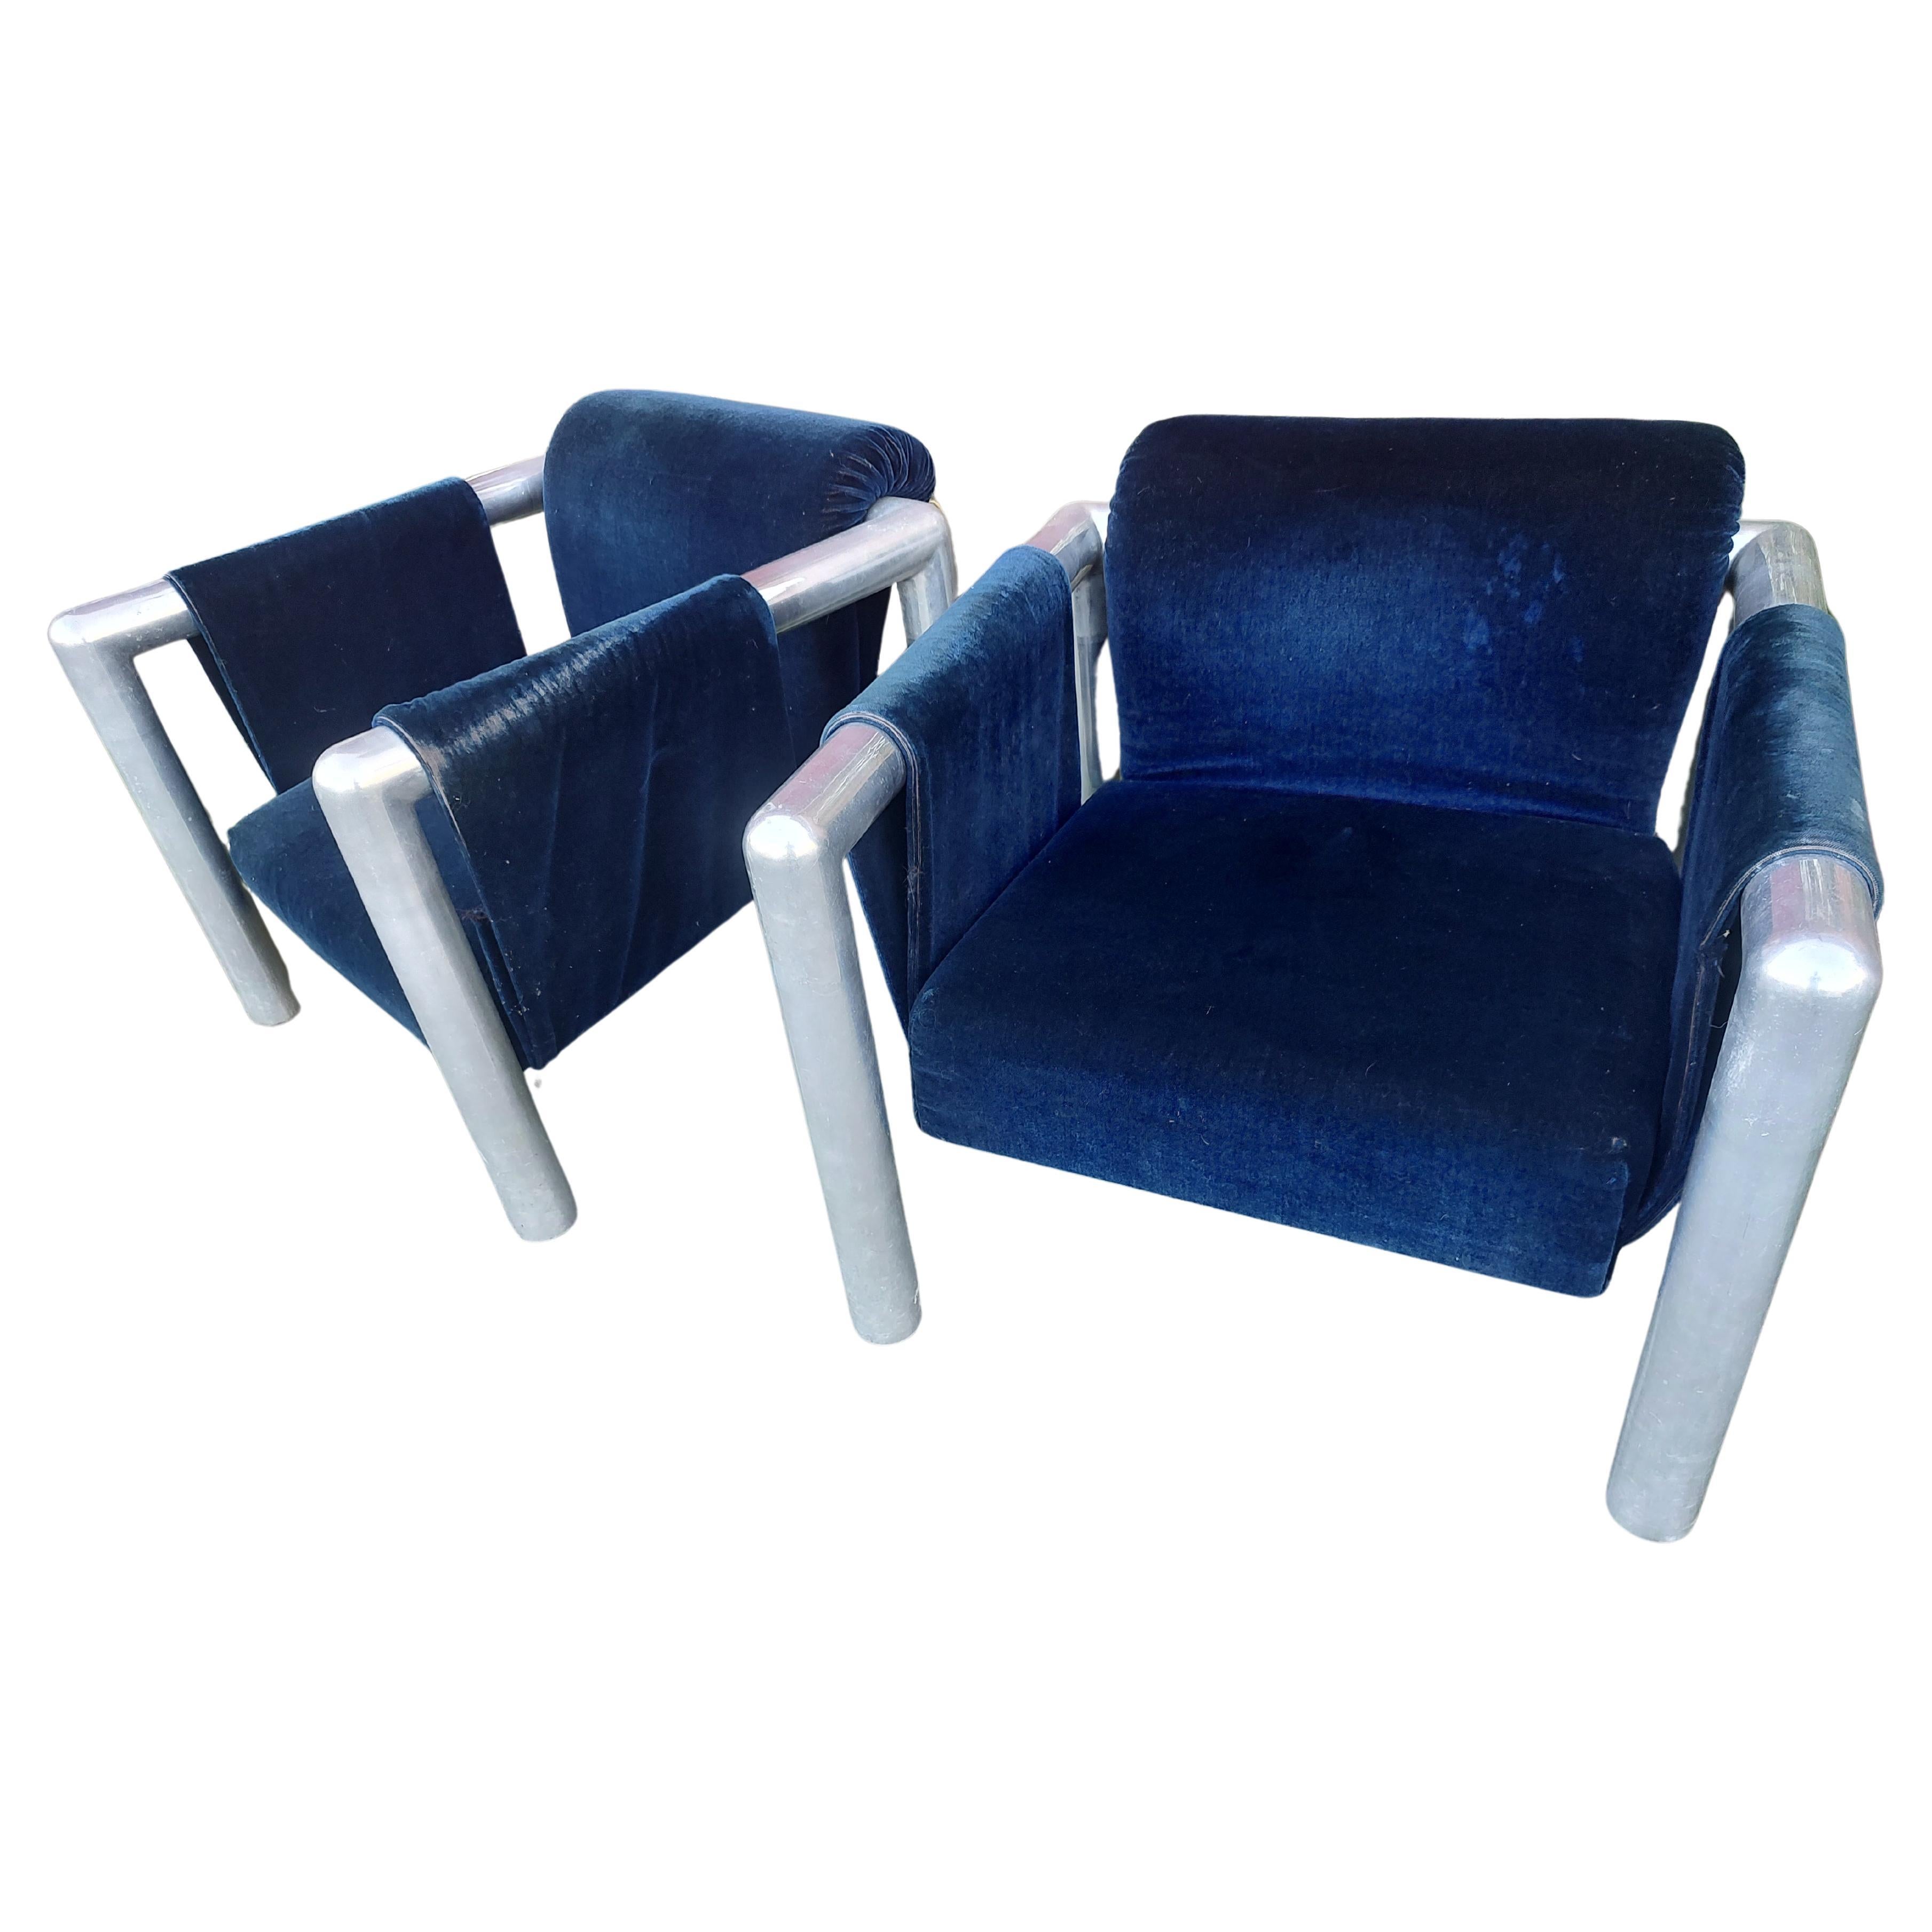 Fabulous pair of sling chairs by John Mascheroni. The fabric is original and in bad shape, torn so it needs a redo. Must say the dark blue velvet suits these chairs very well. Aluminum is great, large and very strong looking. Just needs a polish